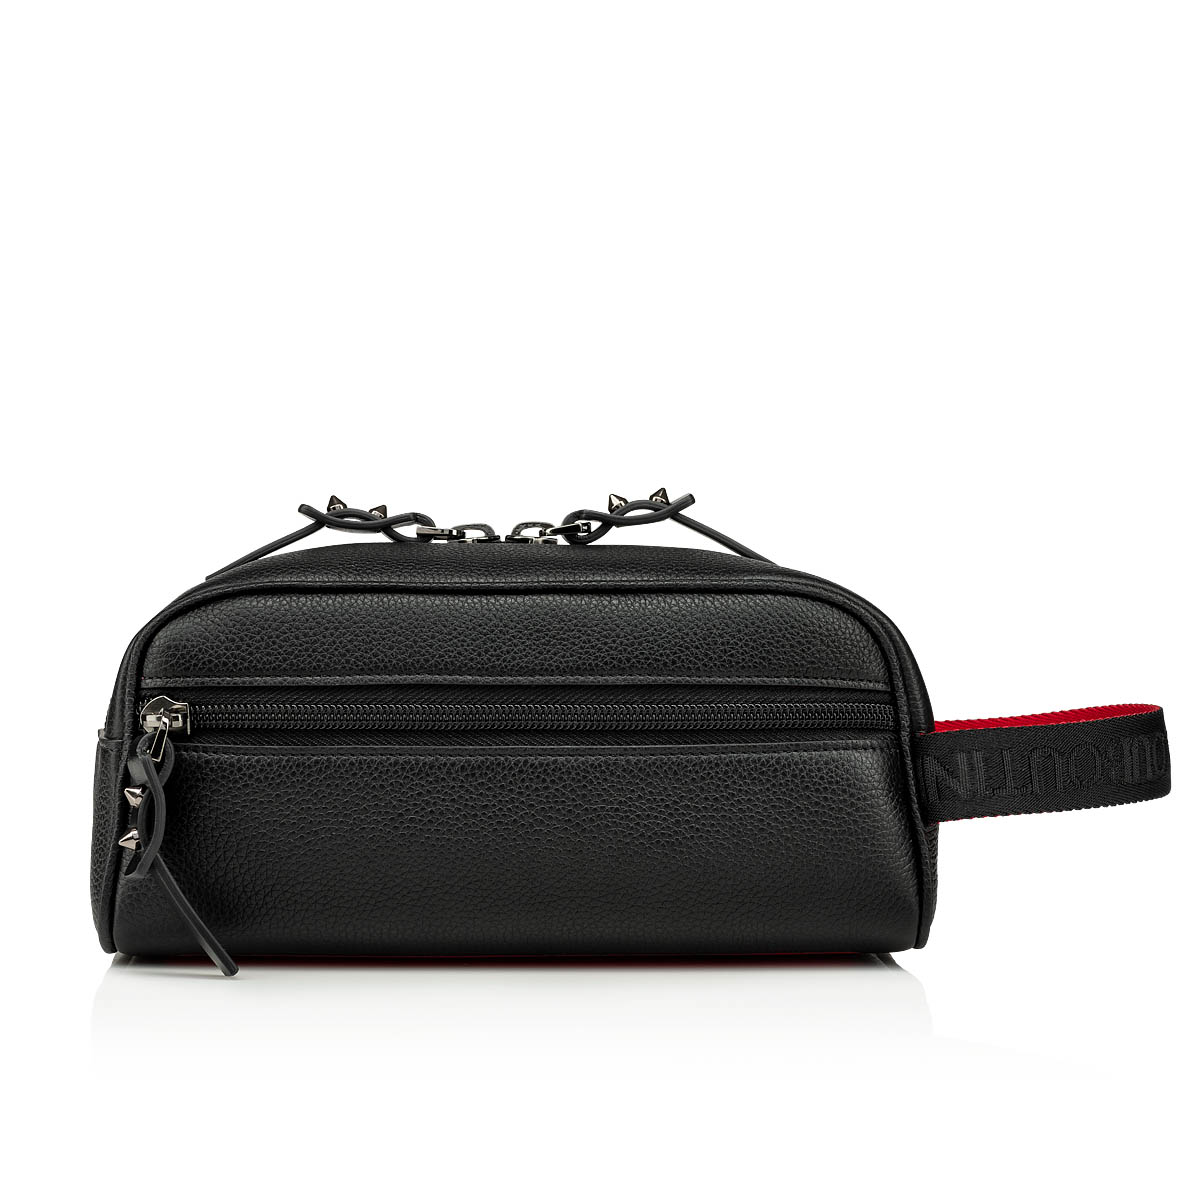 The essentials for men - Christian Louboutin